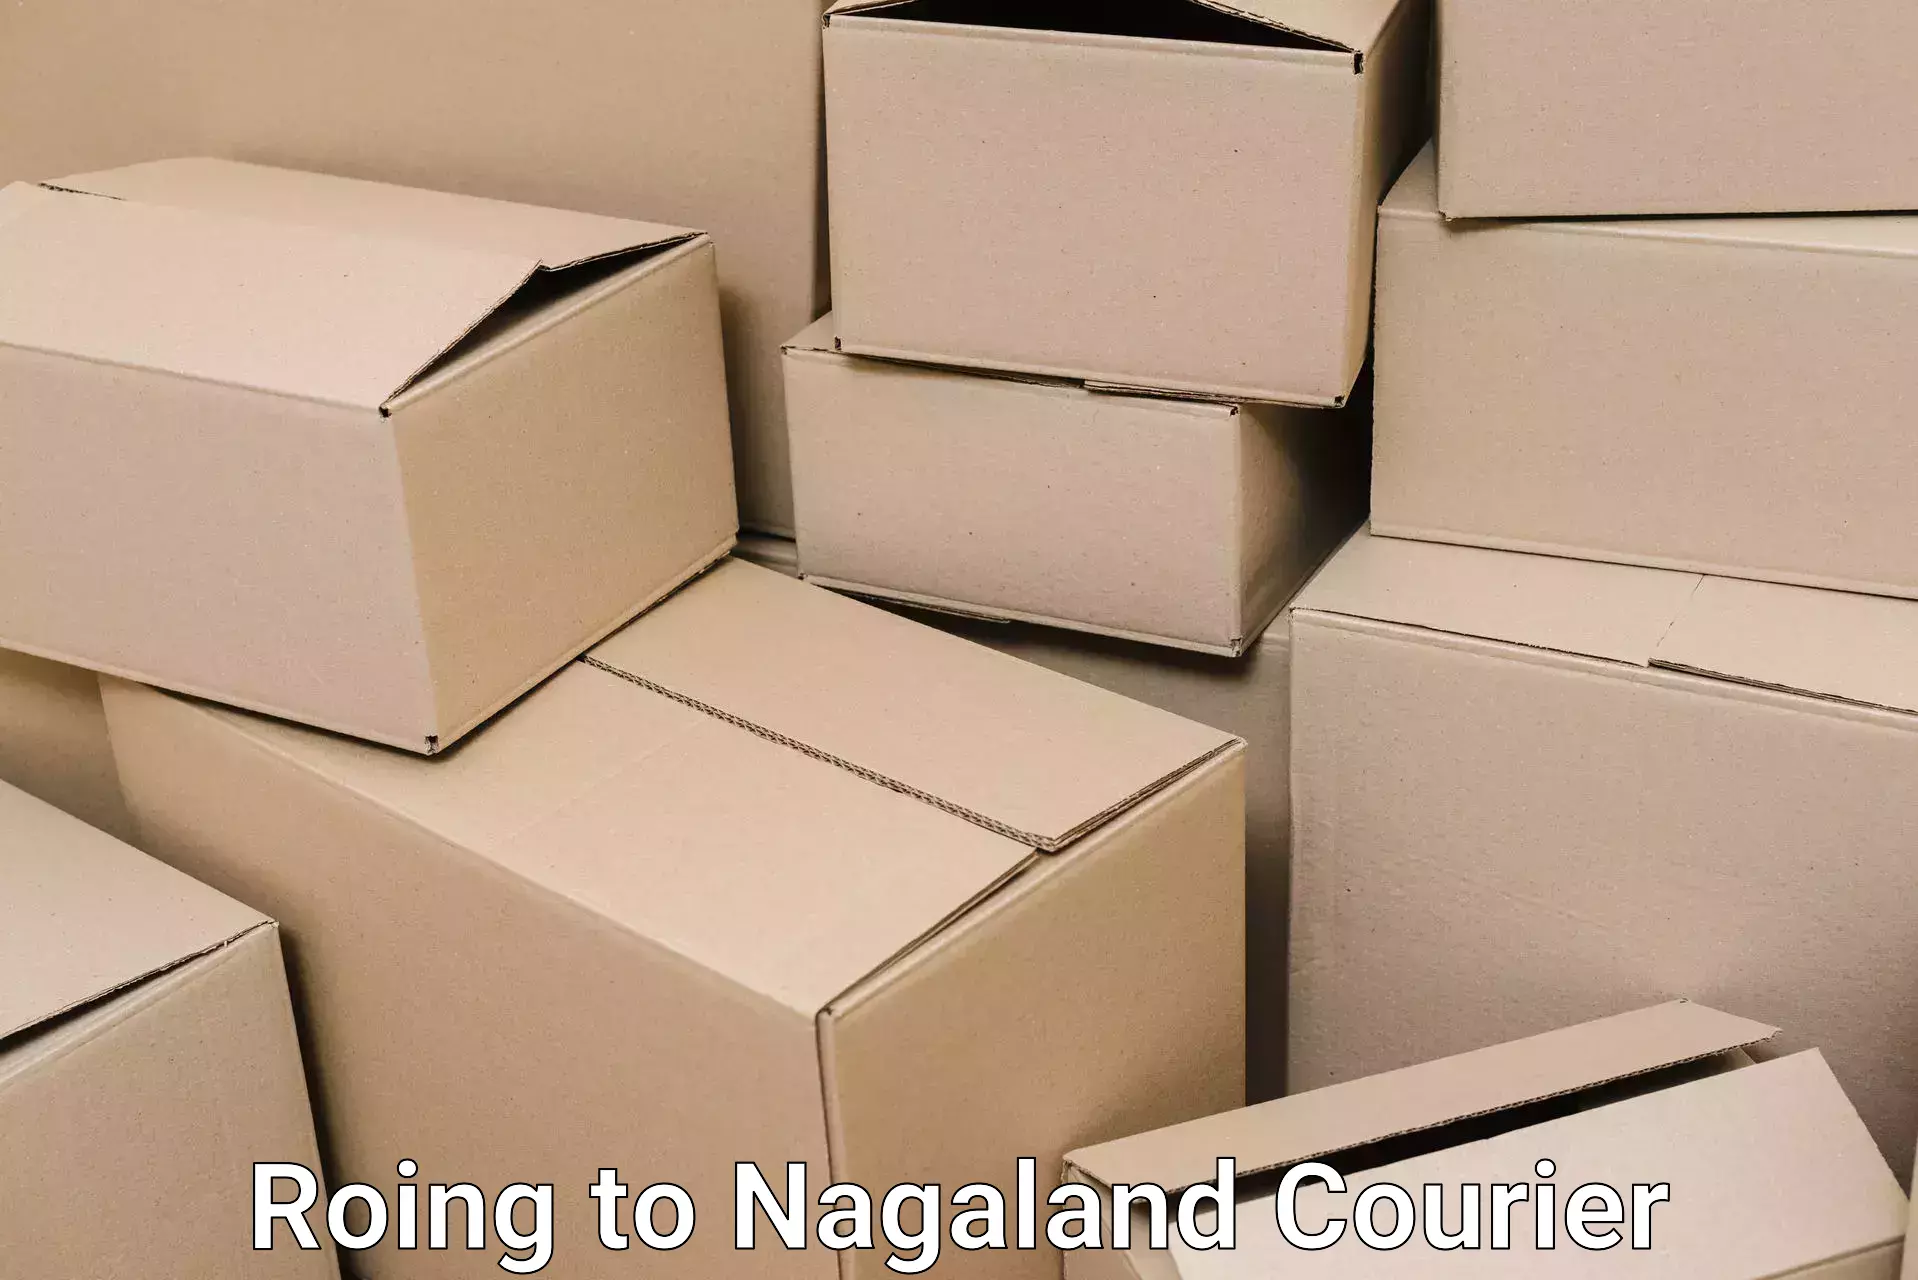 Professional moving company Roing to Nagaland